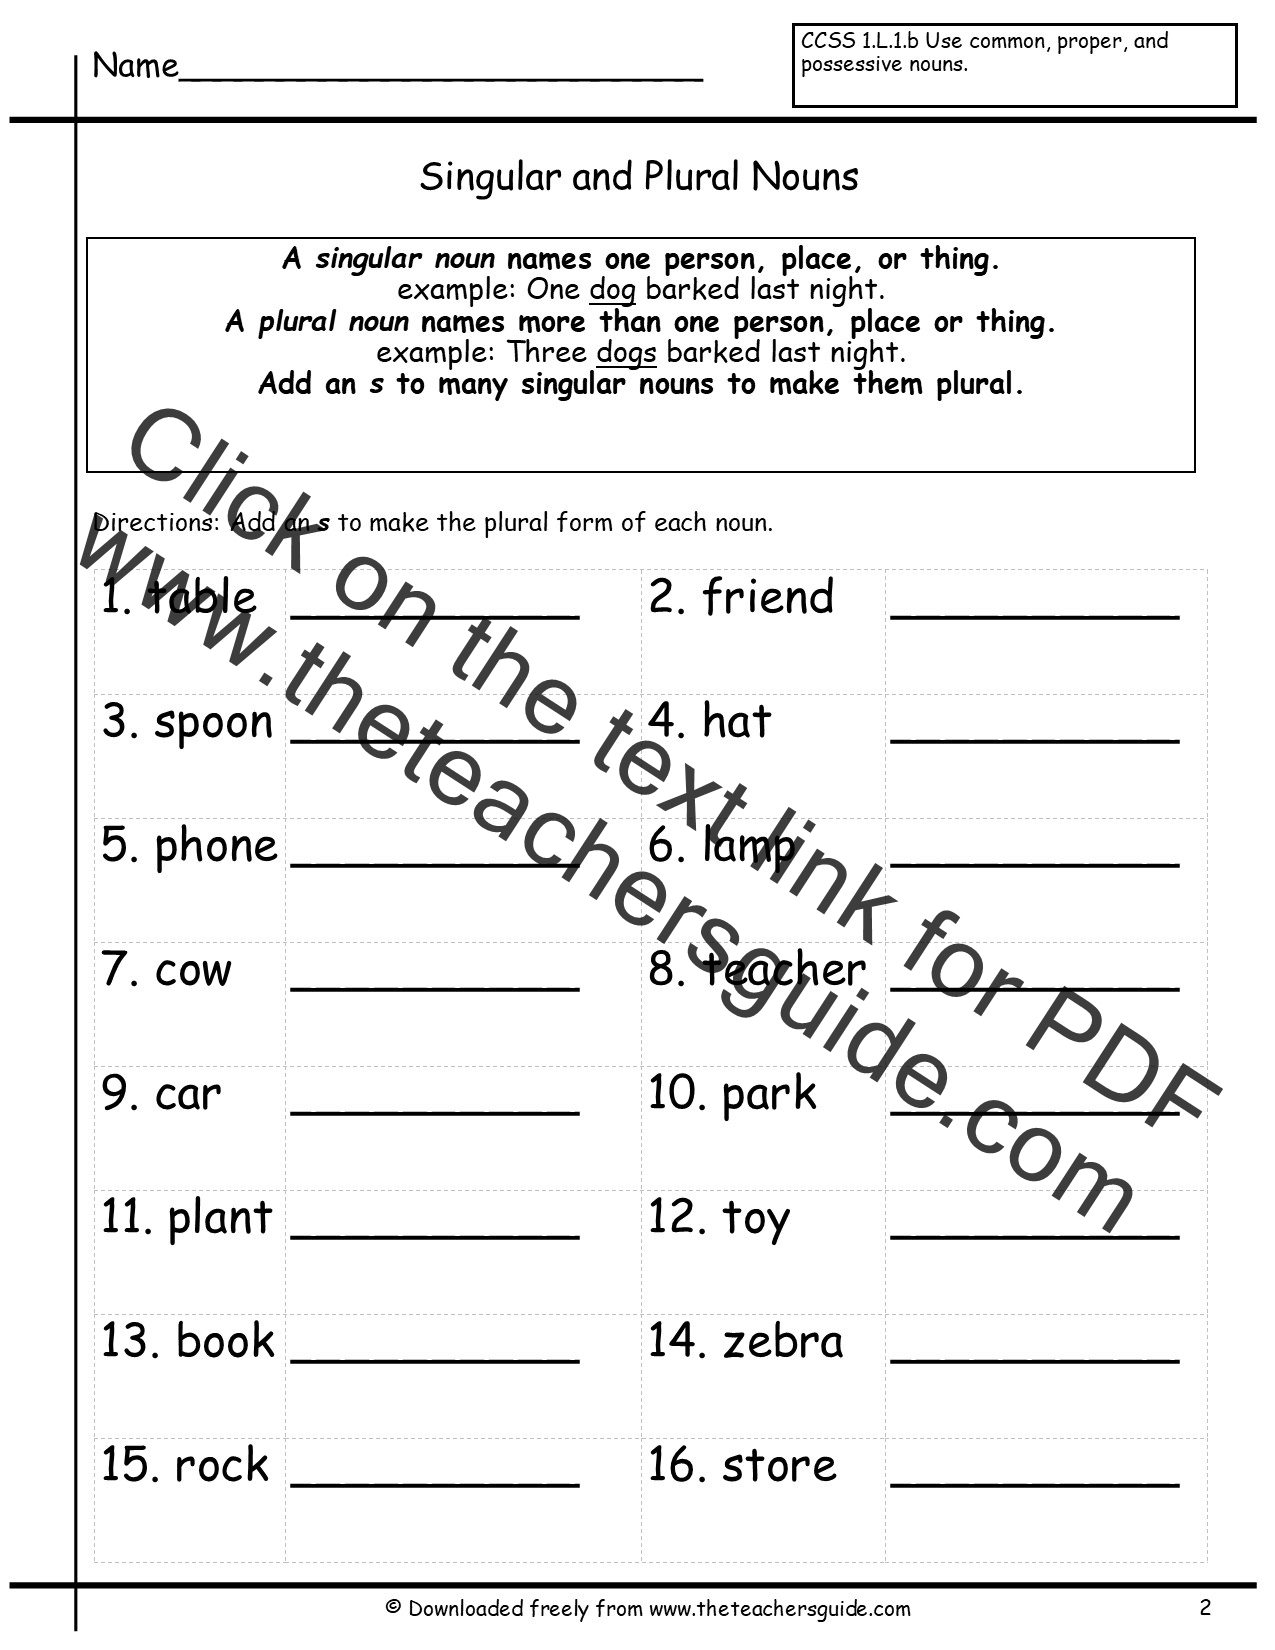 Singular And Plural Nouns Worksheets From The Teacher s Guide